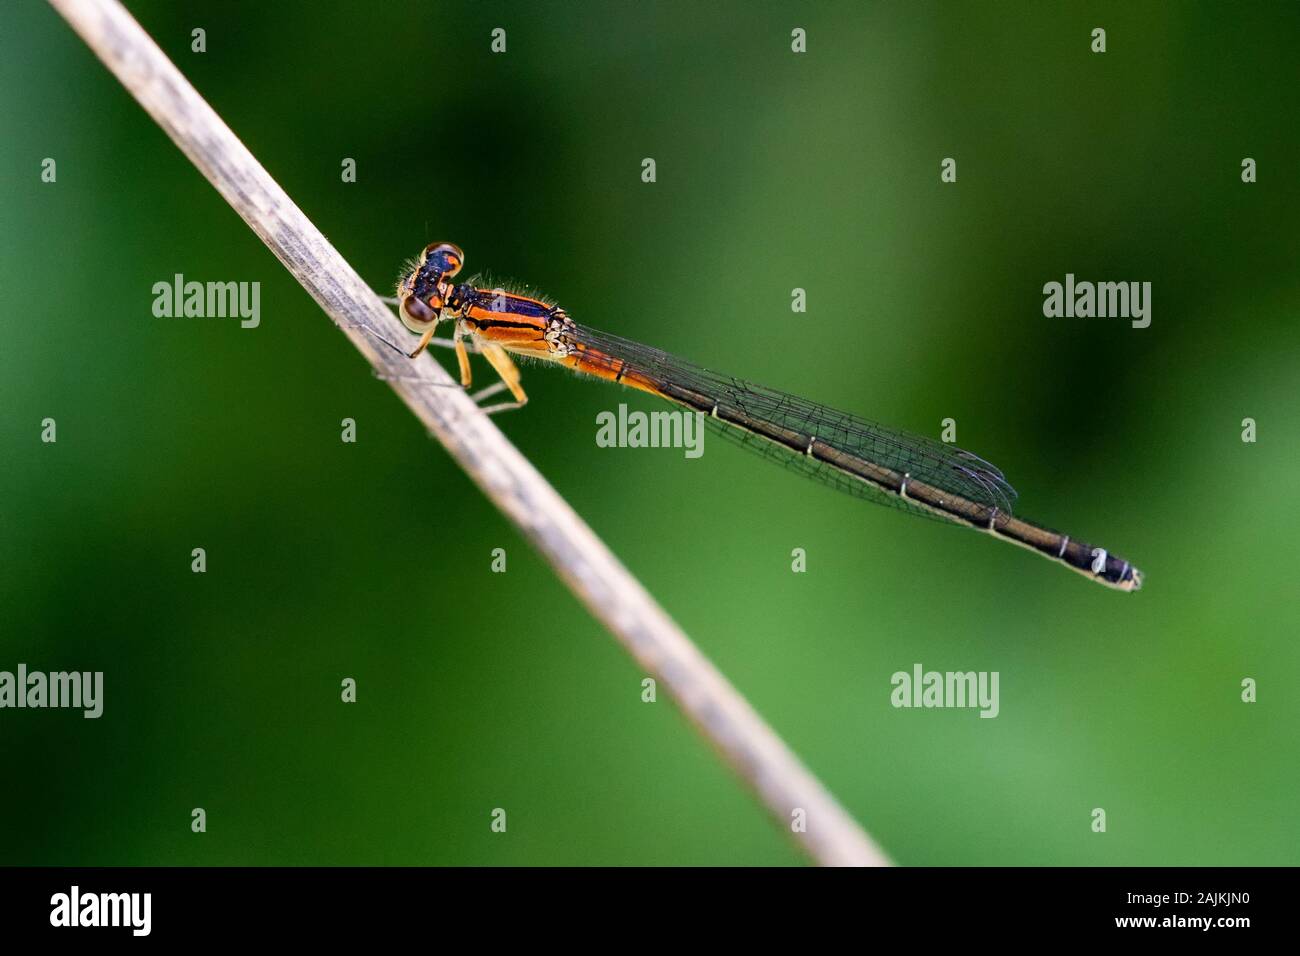 Orange and Black Eastern Forktail Damselfly on a thin flower stalk Stock Photo